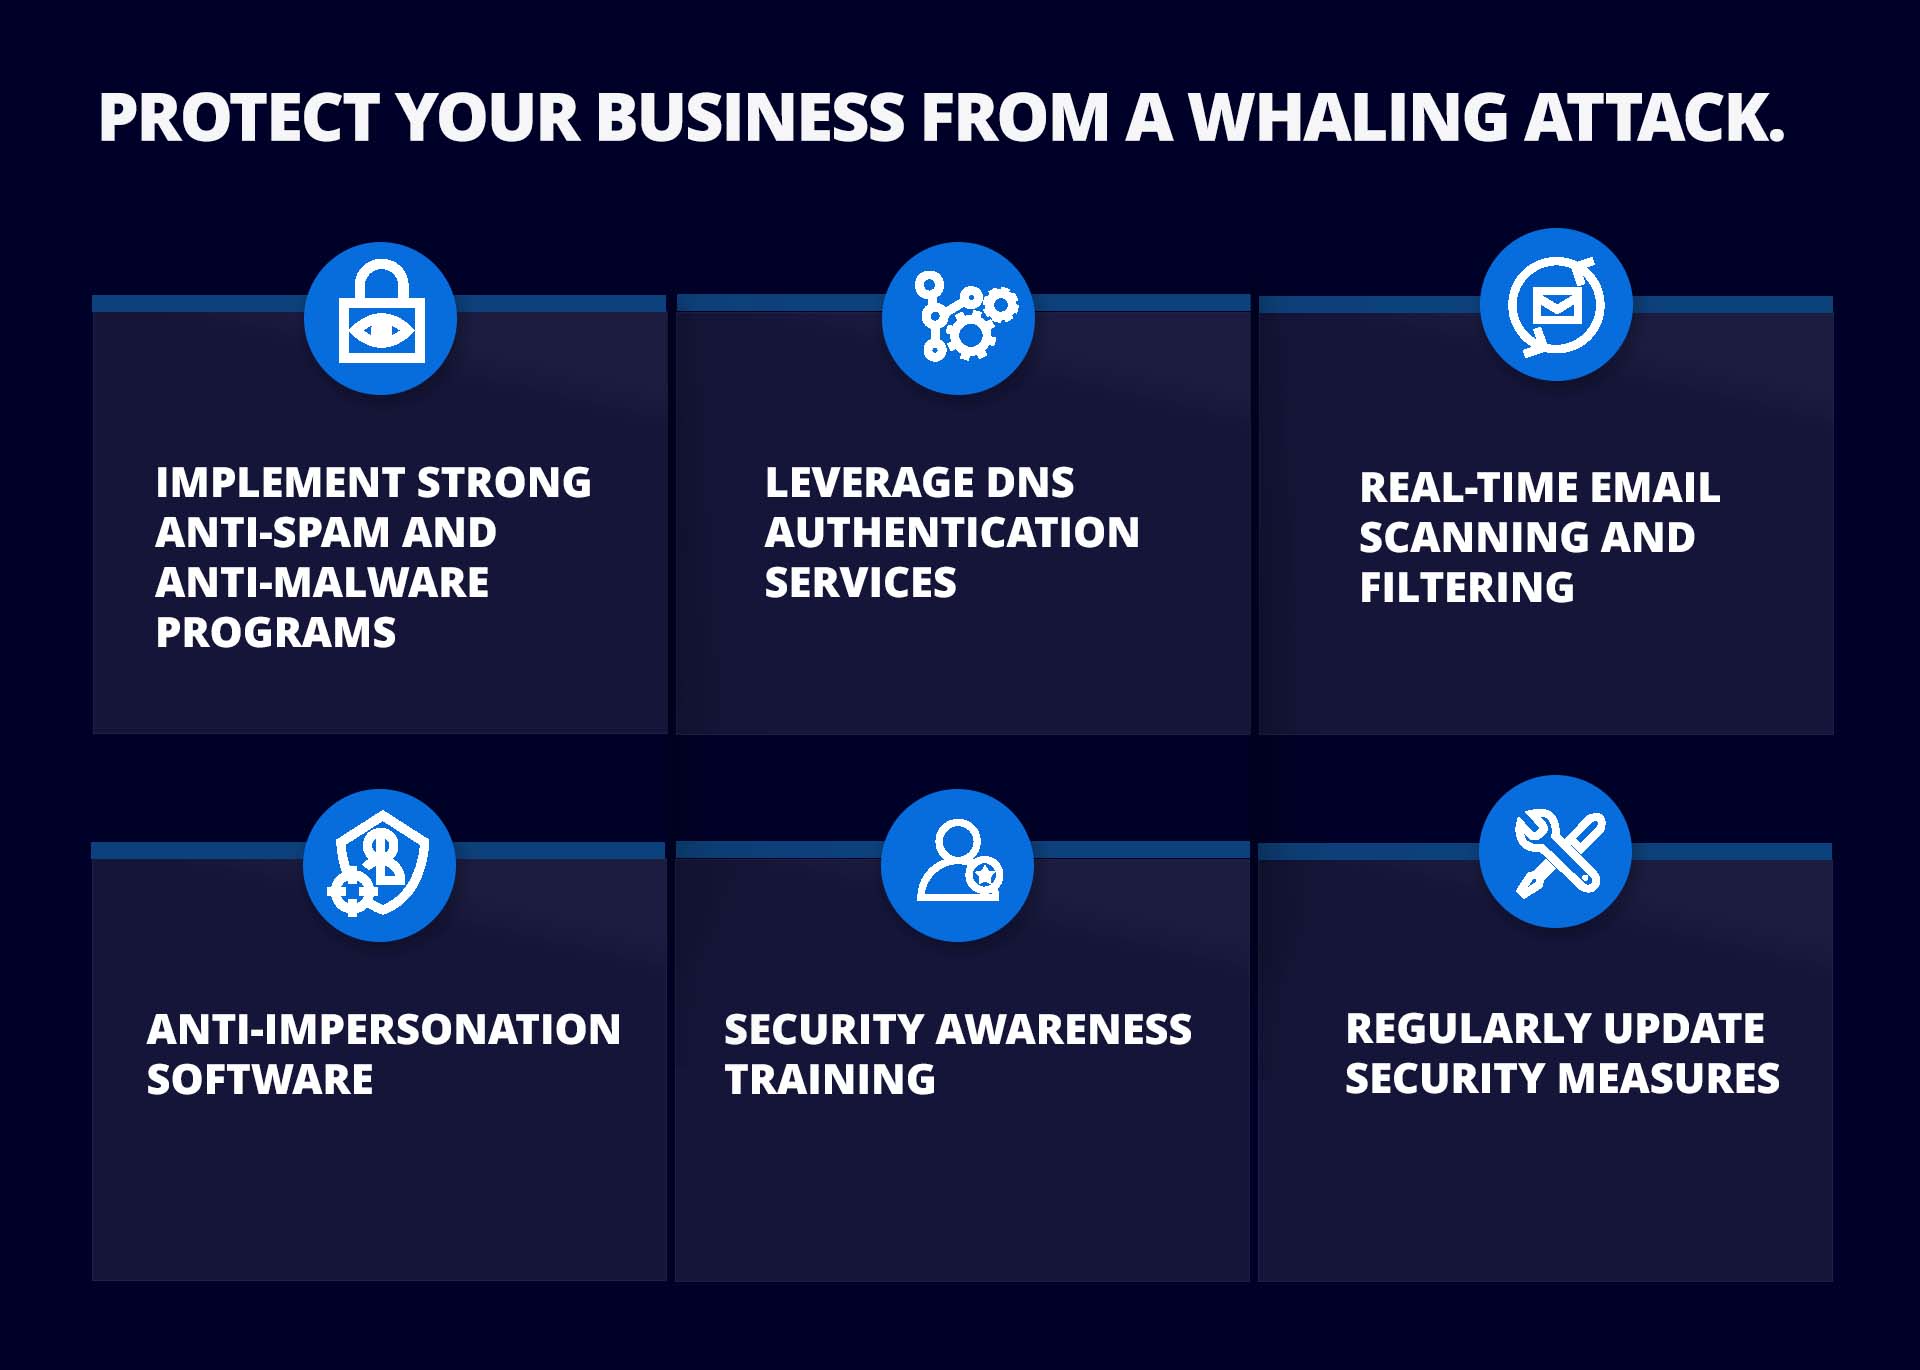 Inforgraphic including tips on how to protect your business from whaling attack. Sections include anti-spam and anti-malware programs, dns authentication services, real-time email scanning and filtering, anti-impersonation software, security awareness training, and regular security measure updates.